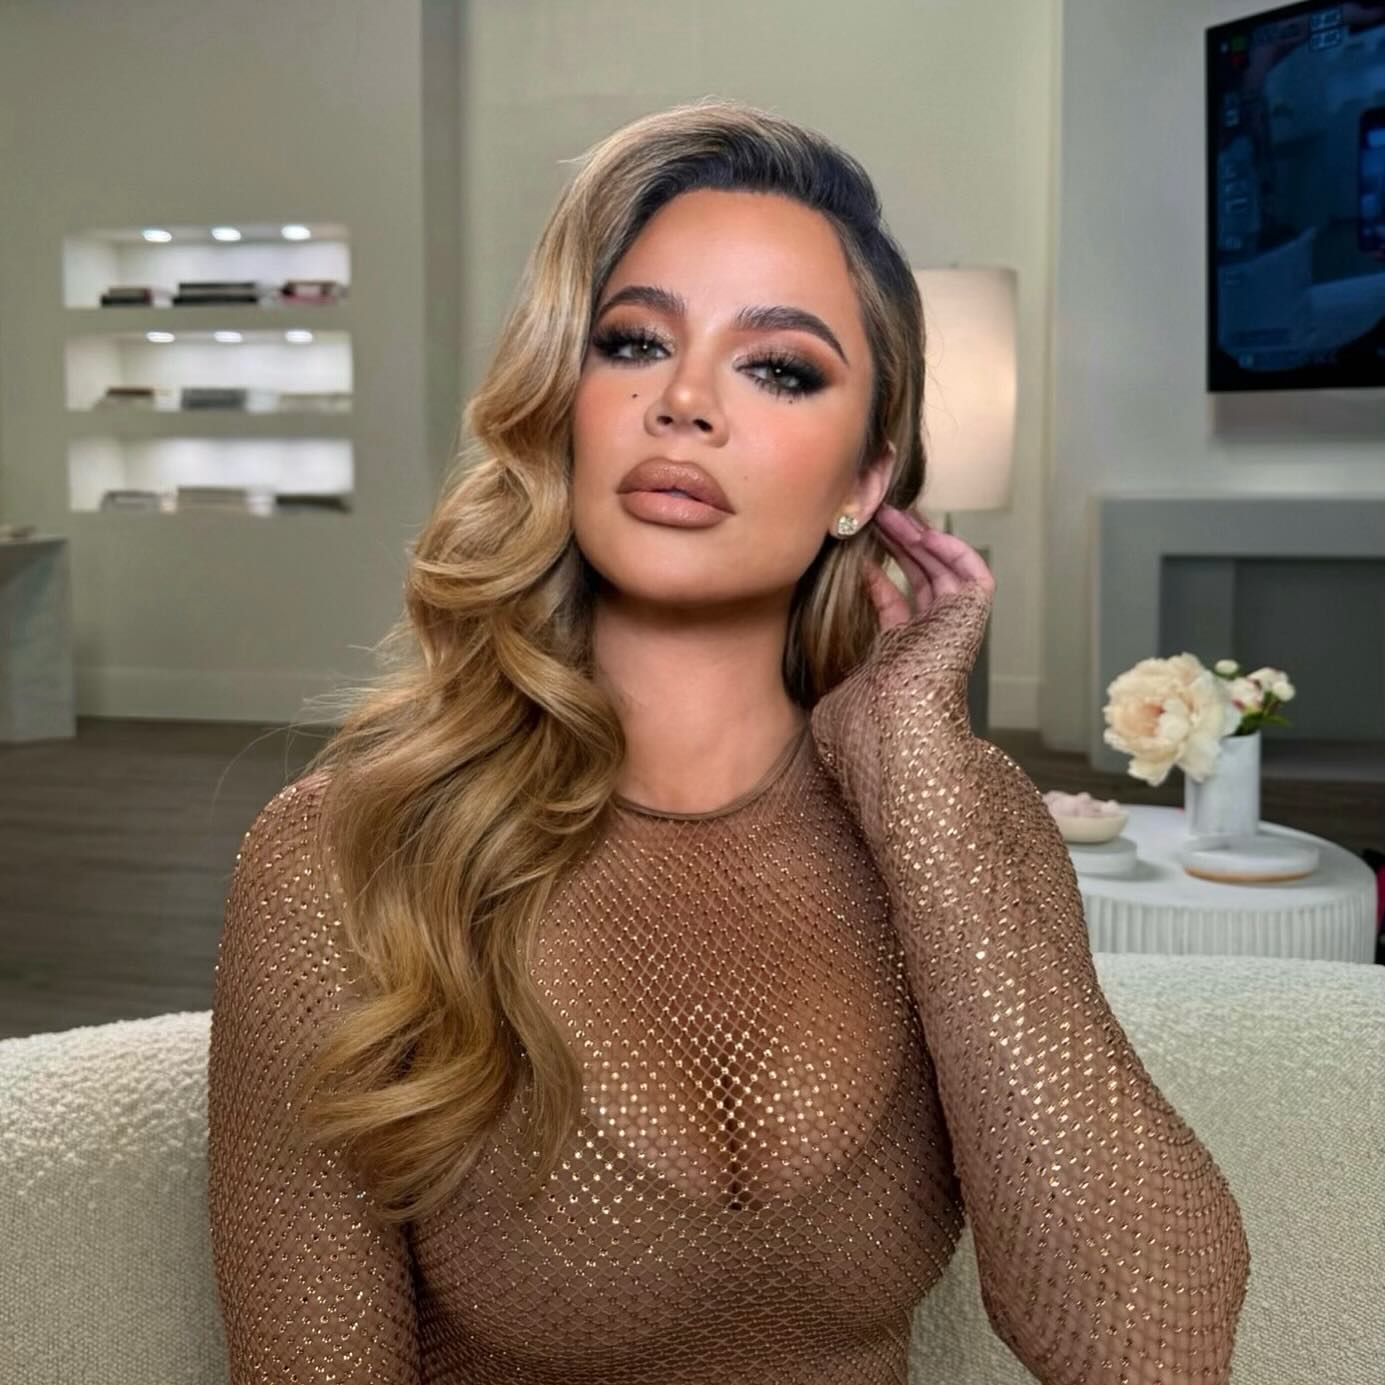 Fans were happy to see that Khloe was keeping Tristan at a distance